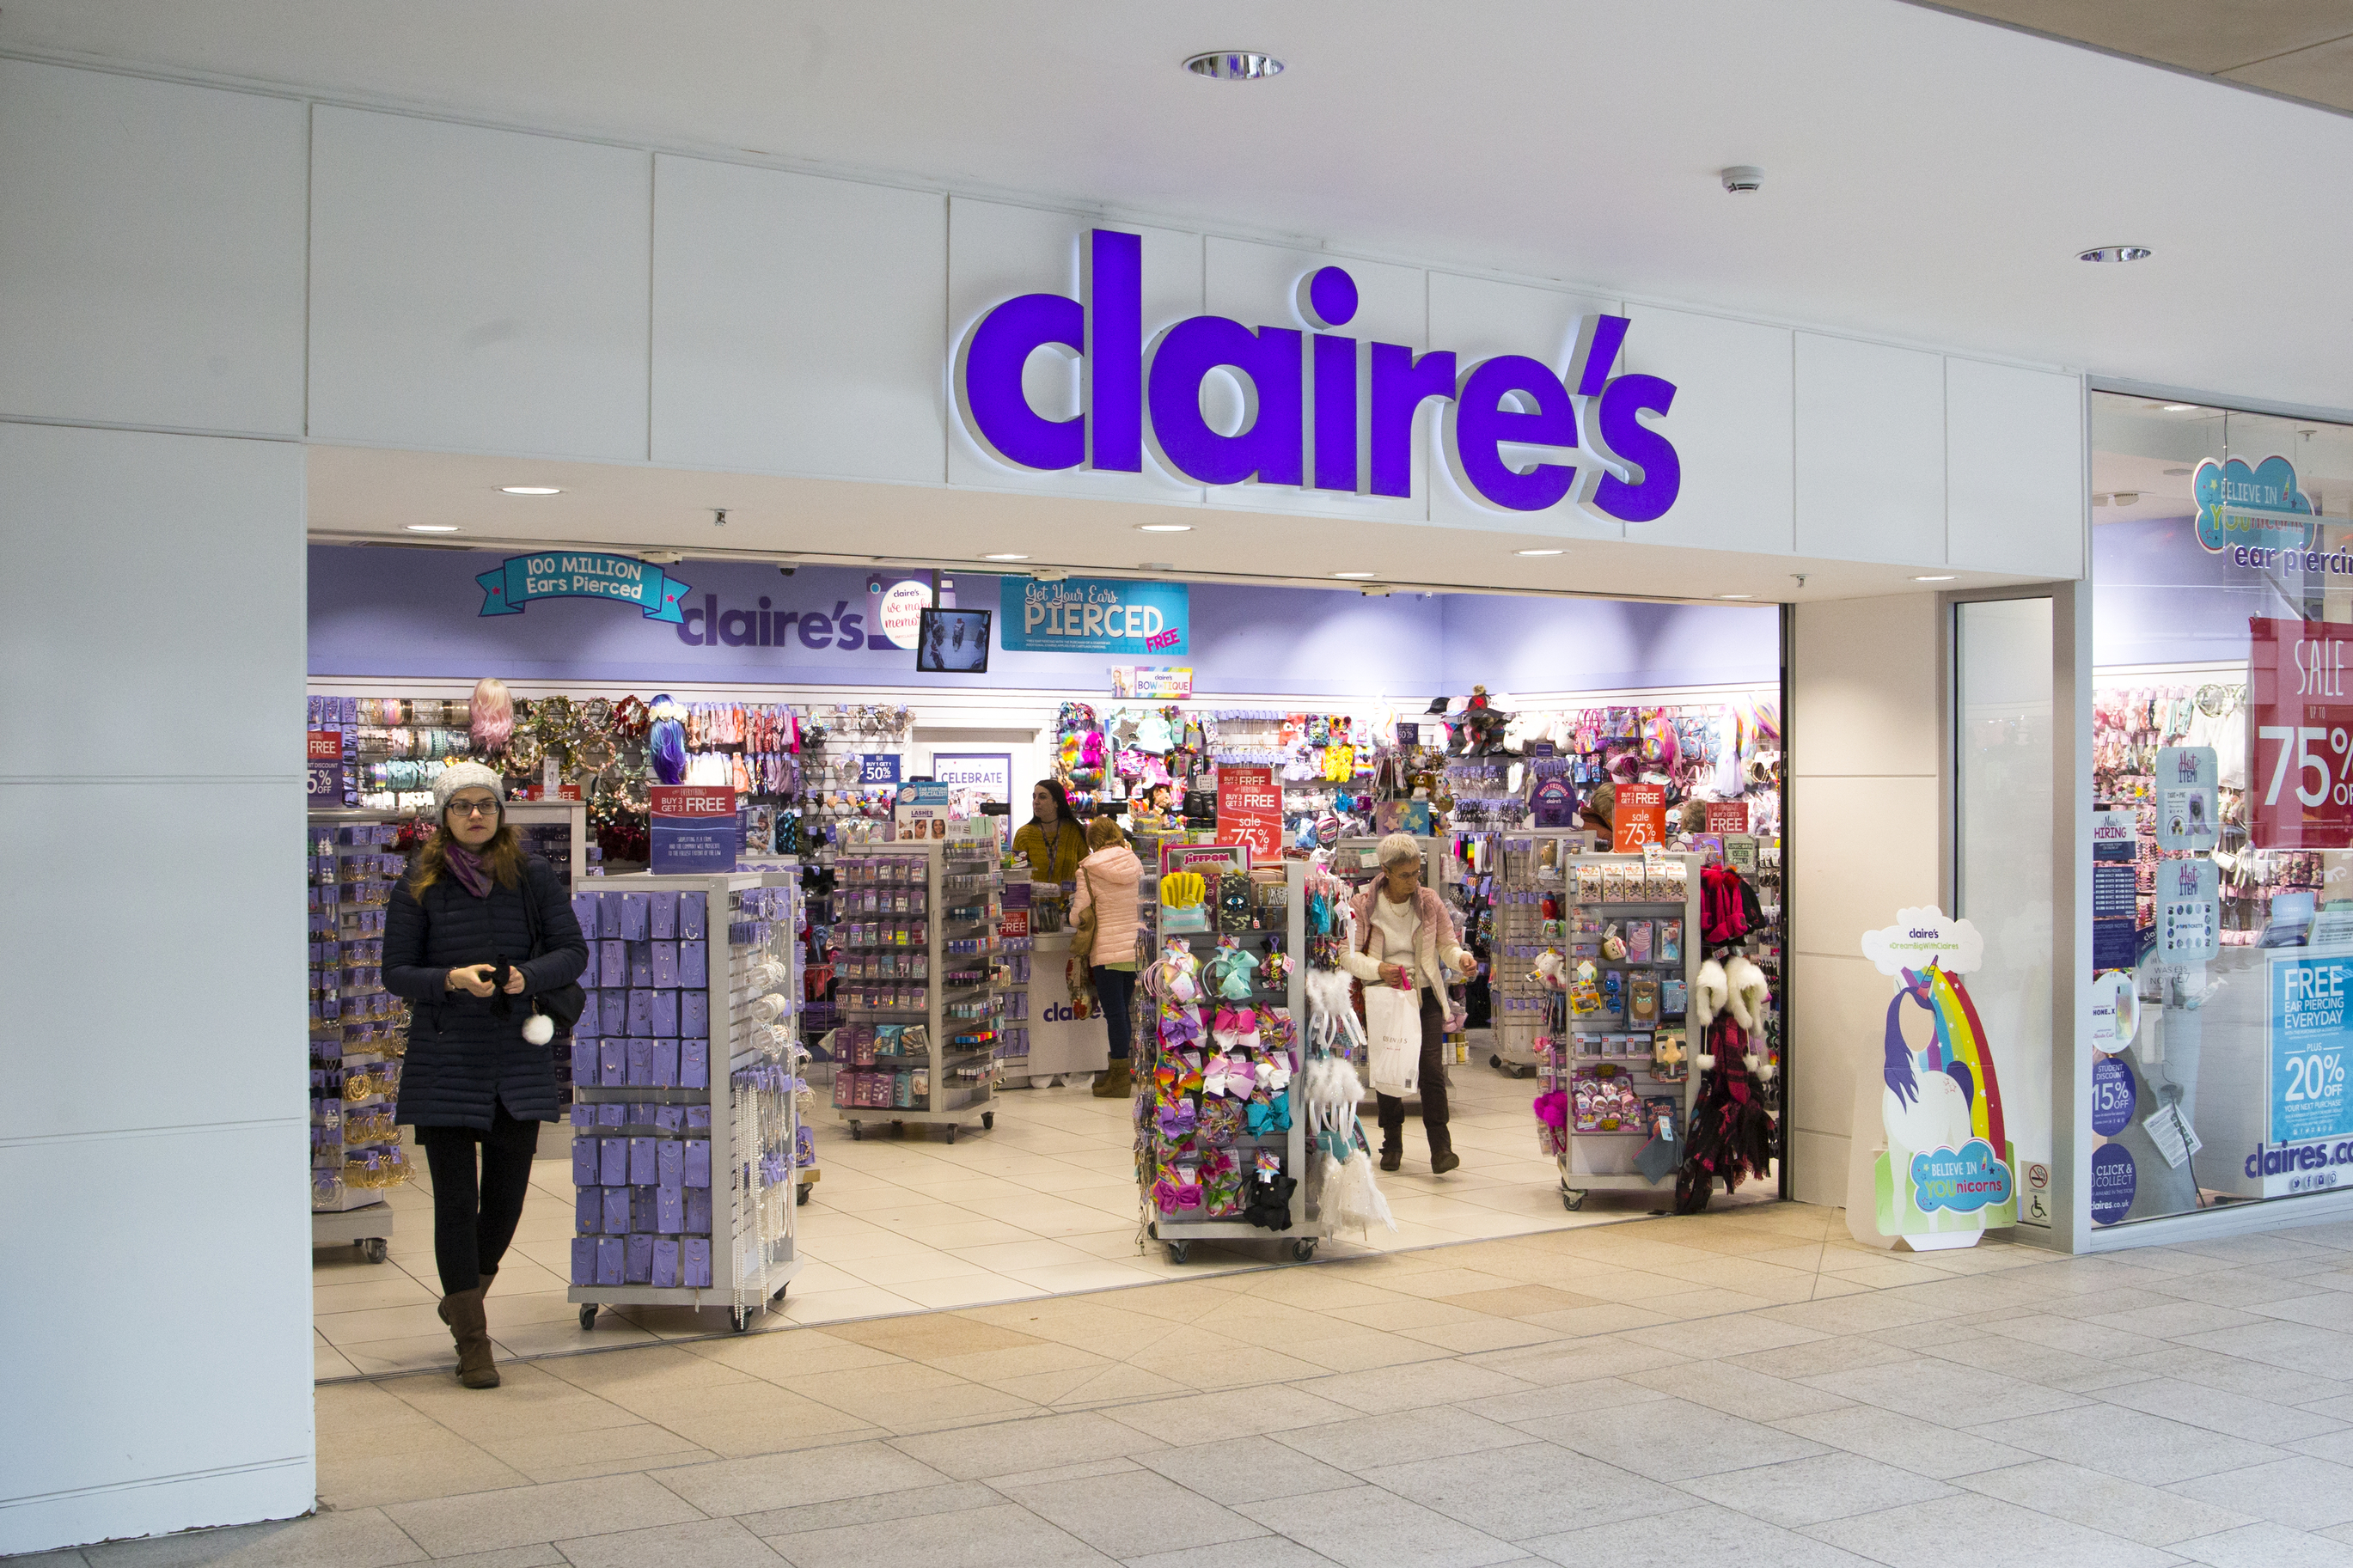 Claire's Coupon - 20% Off Entire Purchase or 50% 1 Item In Store